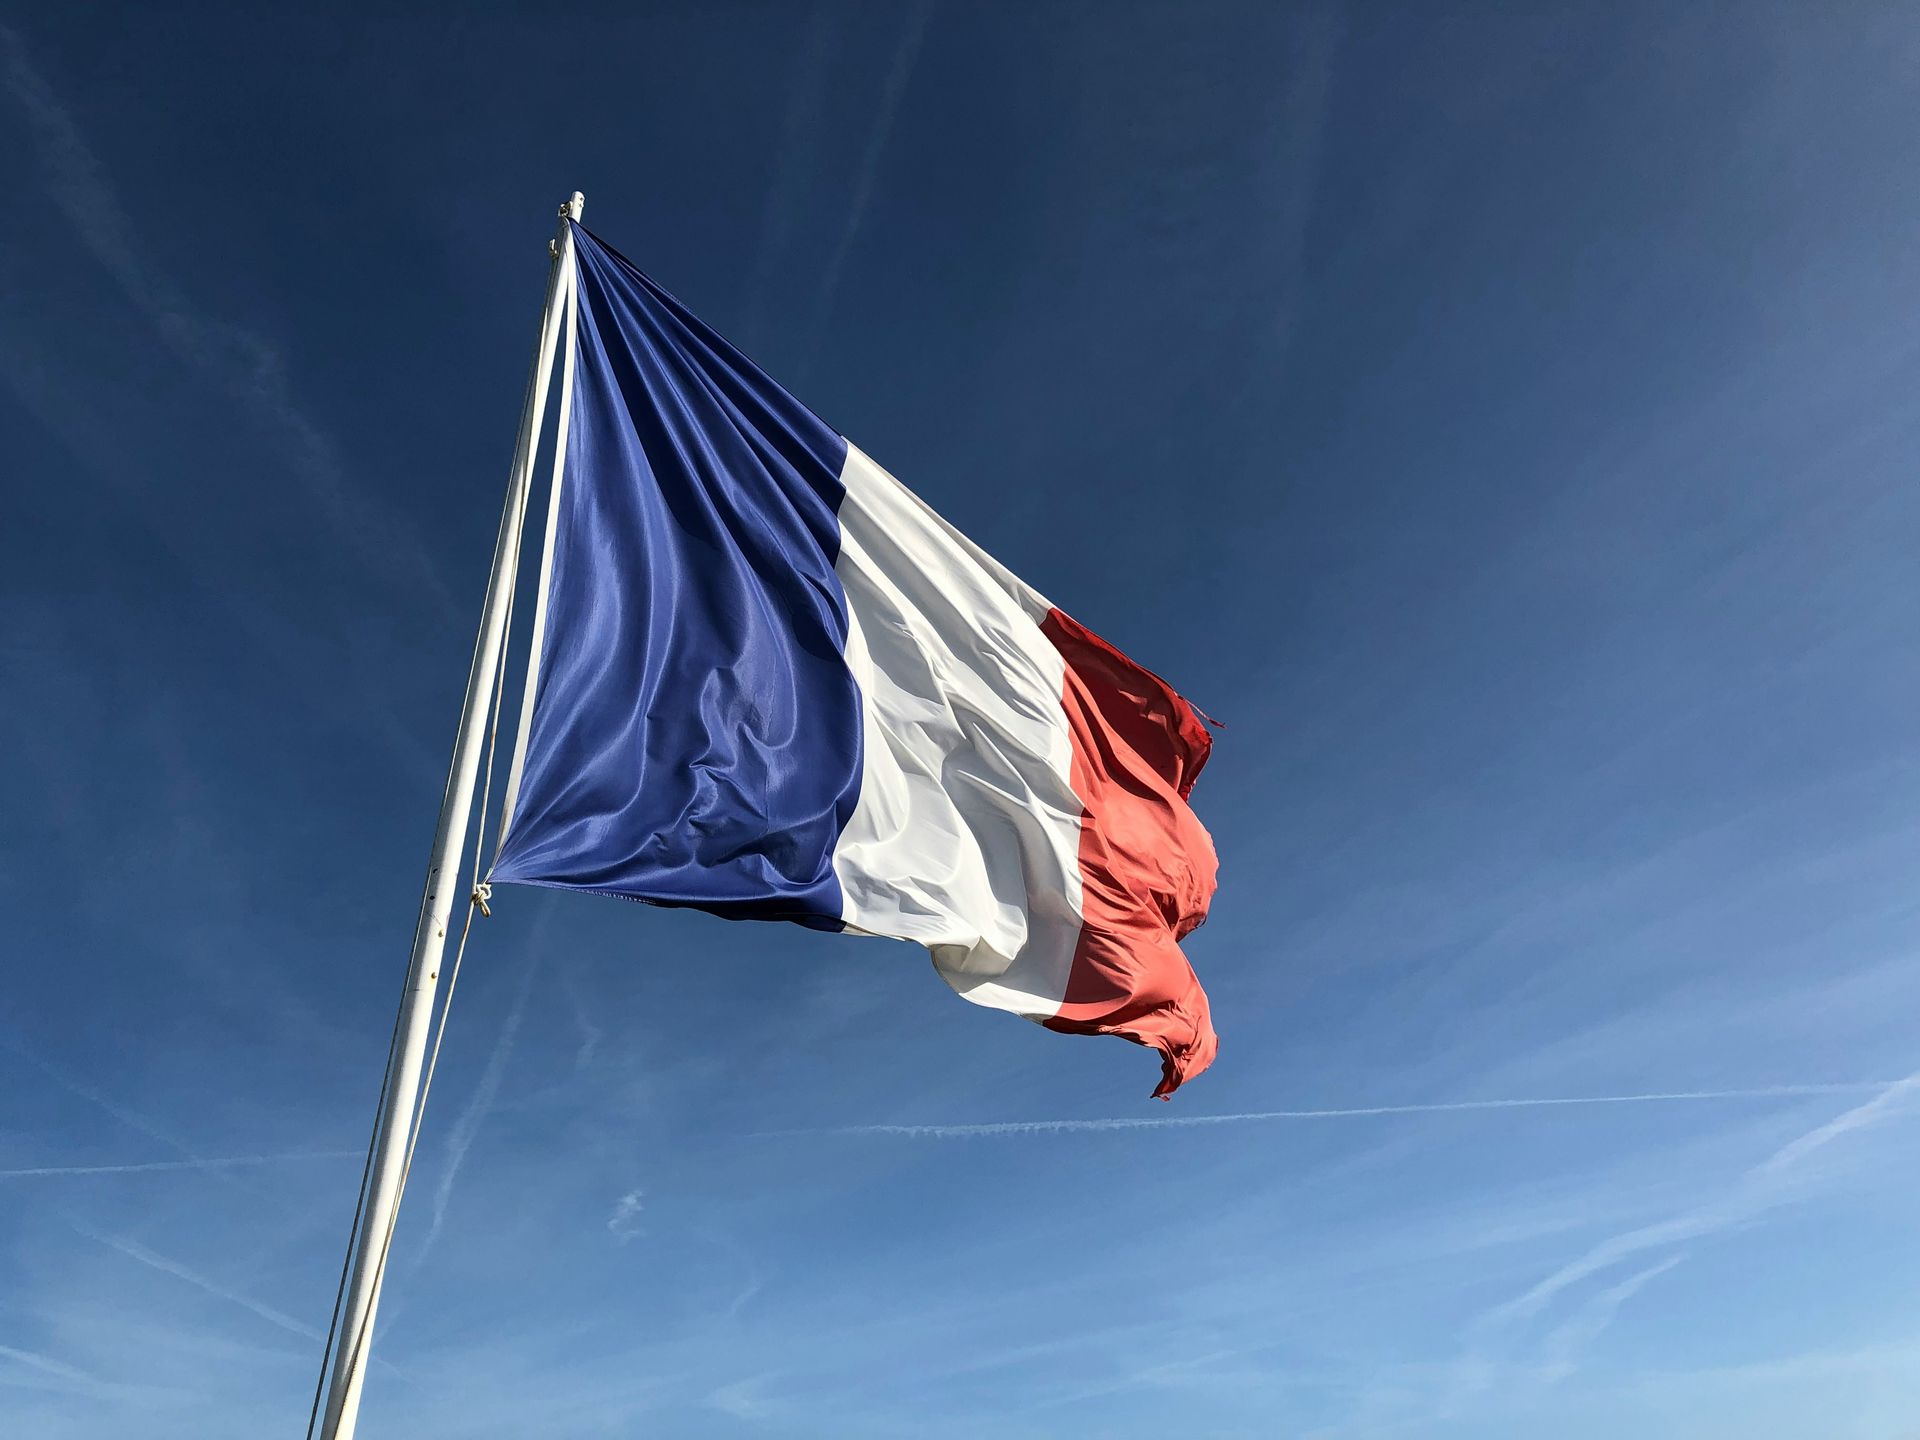 French Competition Authority major fine on Google